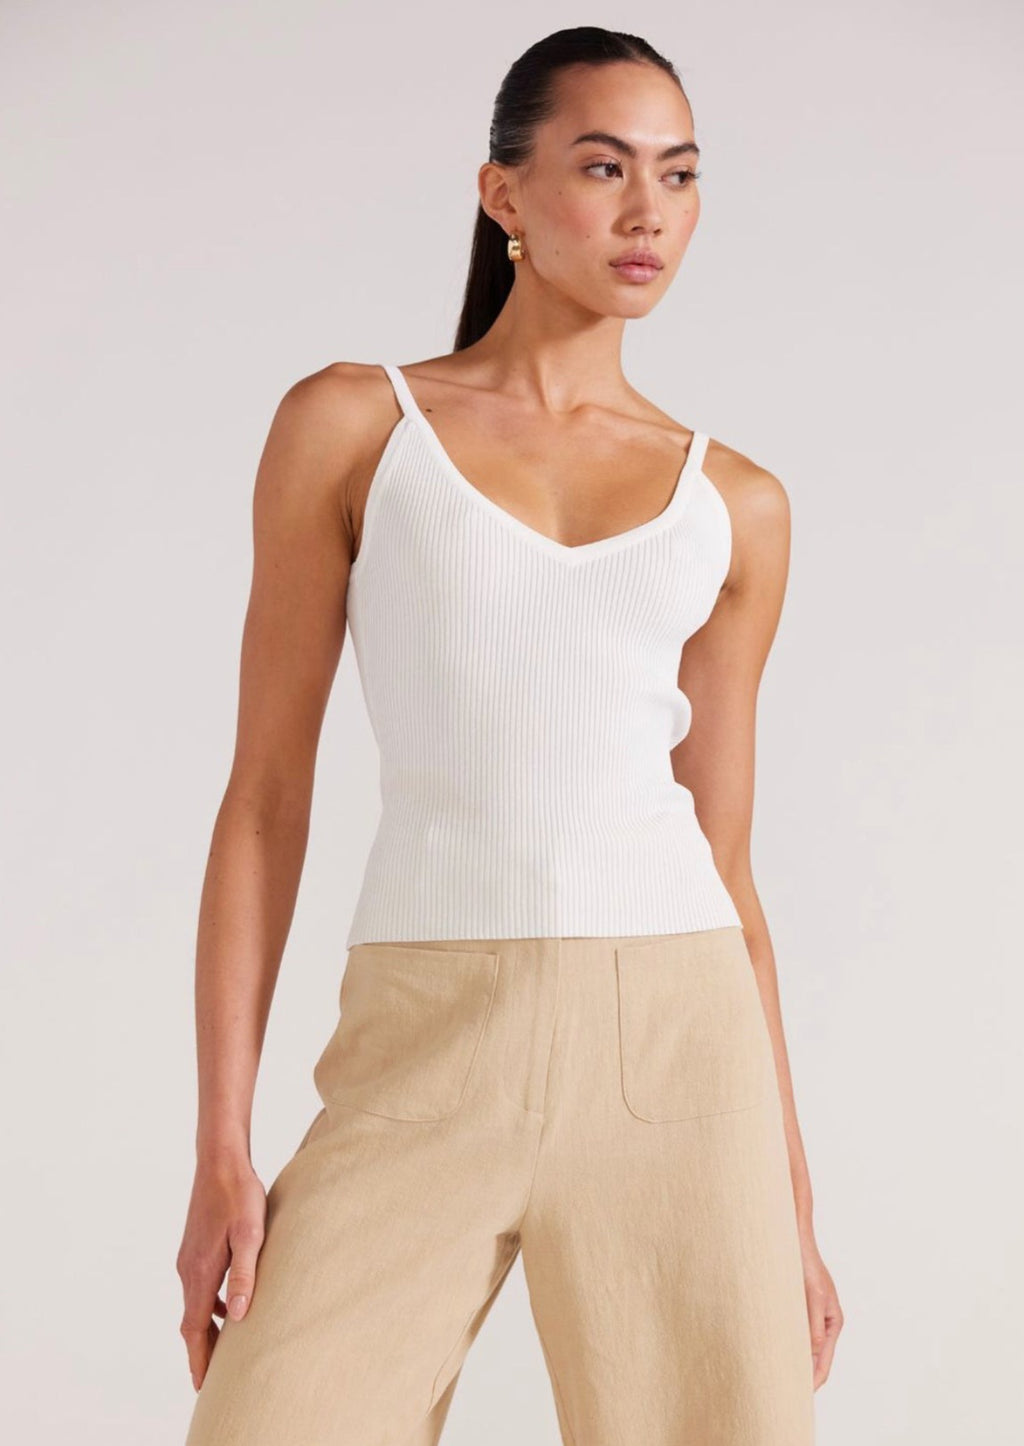 Anica Knit Singlet - White, by Staple The Label A staple in the wardrobe, the Anica Knit Singlet is a versatile everyday piece. Featuring a fitted silhouette, and a v-neckline, this singlet has been crafted from a ribbed knit making it comfortable to wear.  - v-neckline - Fitted silhouette - Full length - Knit fabrication - Designed in Sydney